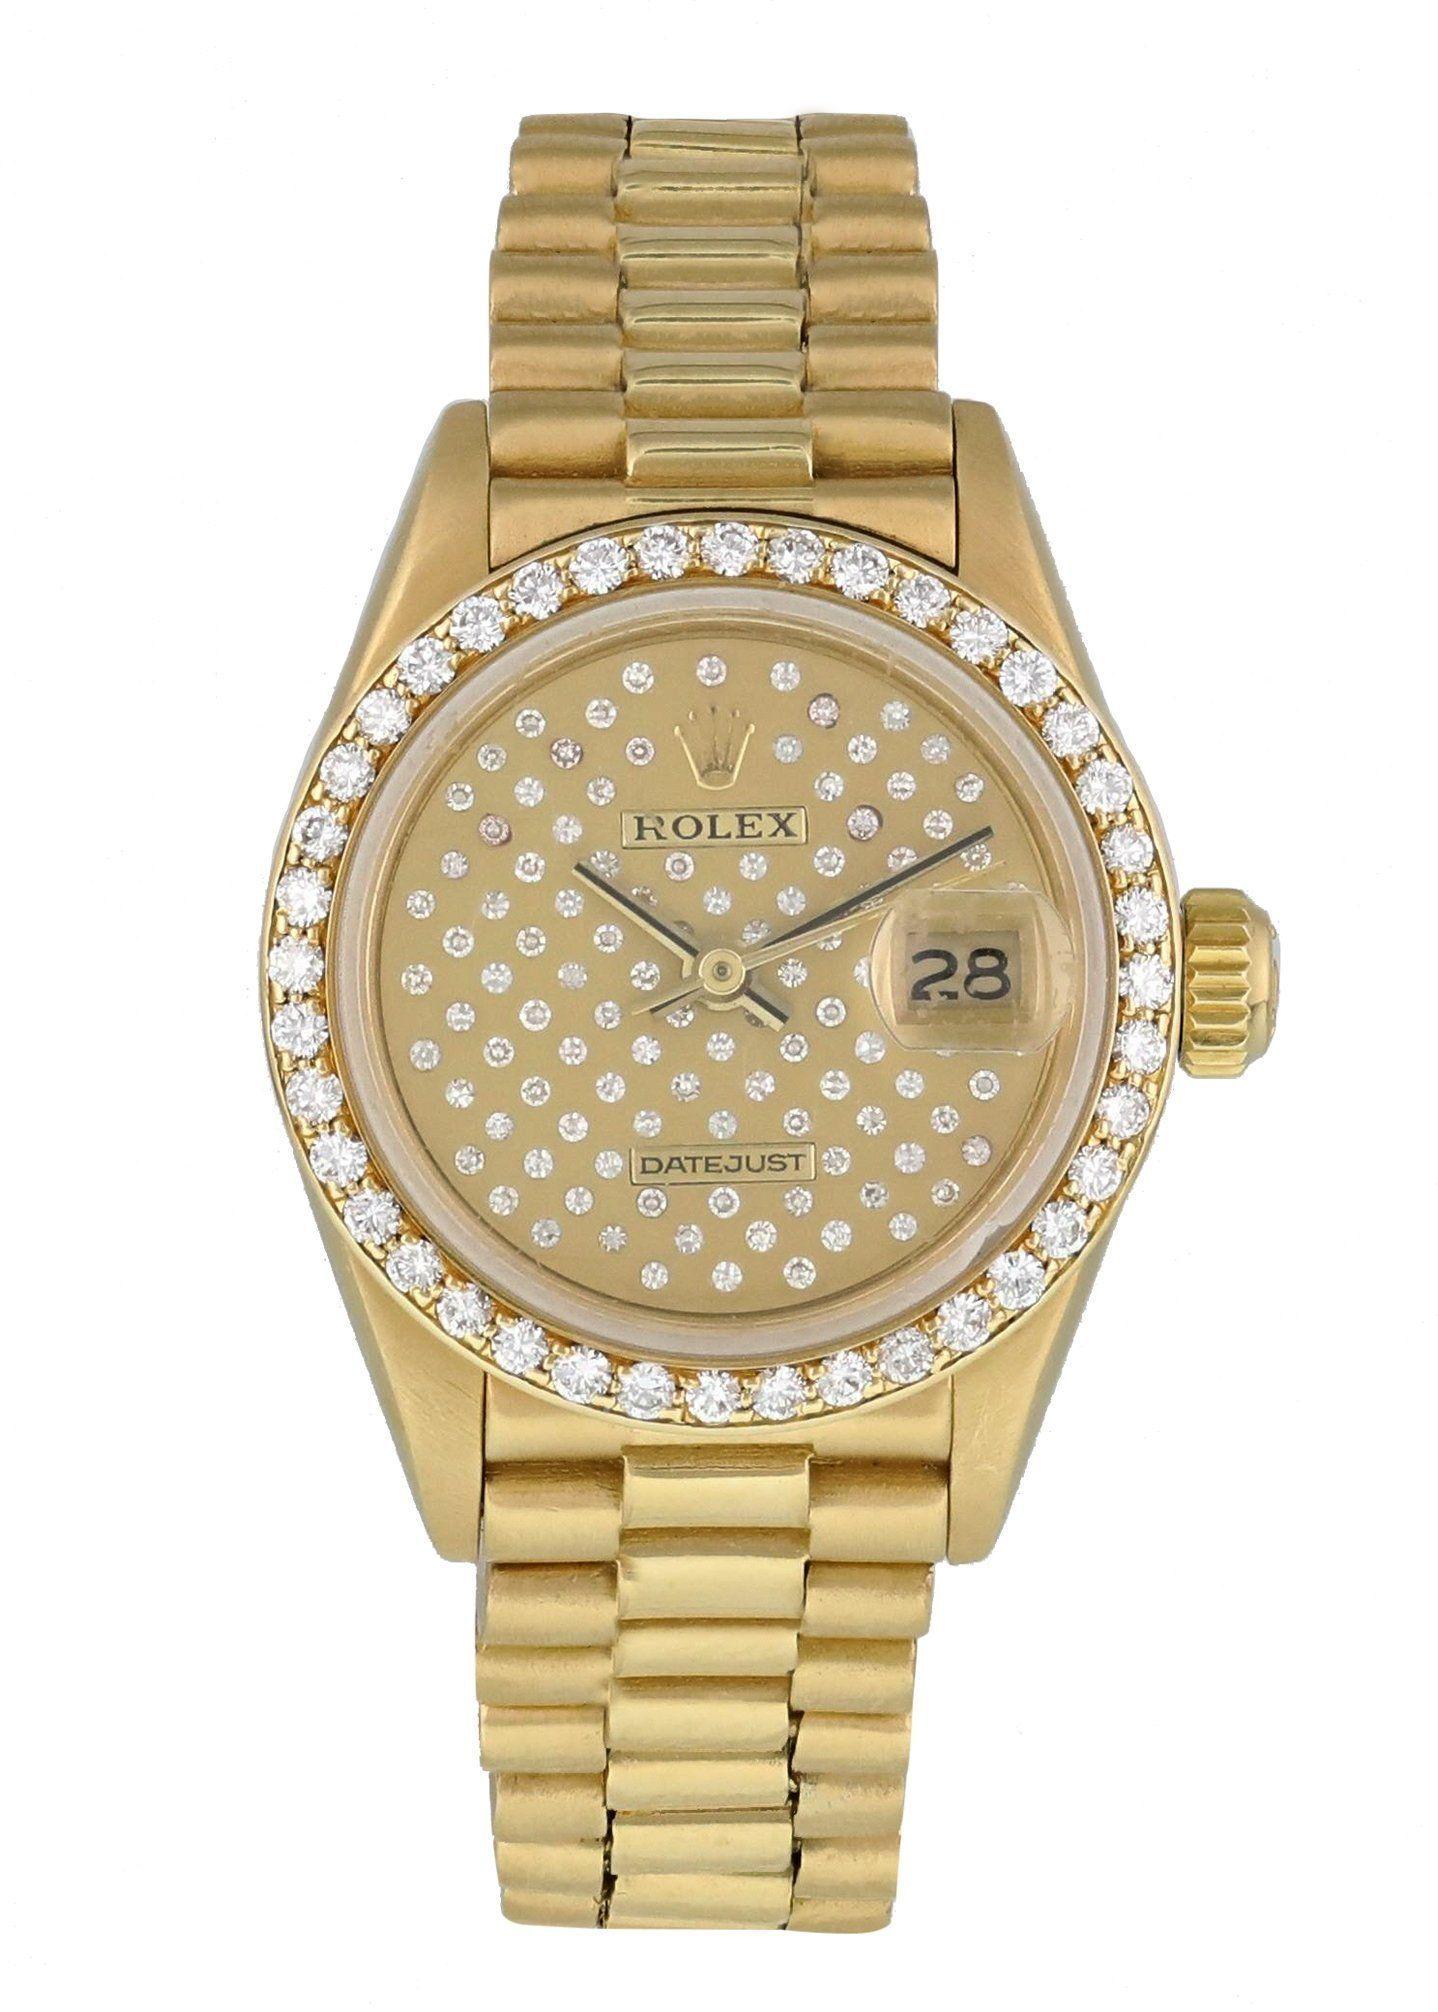 Rolex Datejust  Pleiade Dial 69138 Ladies Watch. 
26mm 18k Yellow Gold case. 
Yellow Gold None bezel. 
Champagne Pleiade Diamond Dial with gold hands and index hour markers. 
Minute markers on the outer dial. 
Date display at the 3 o'clock position.